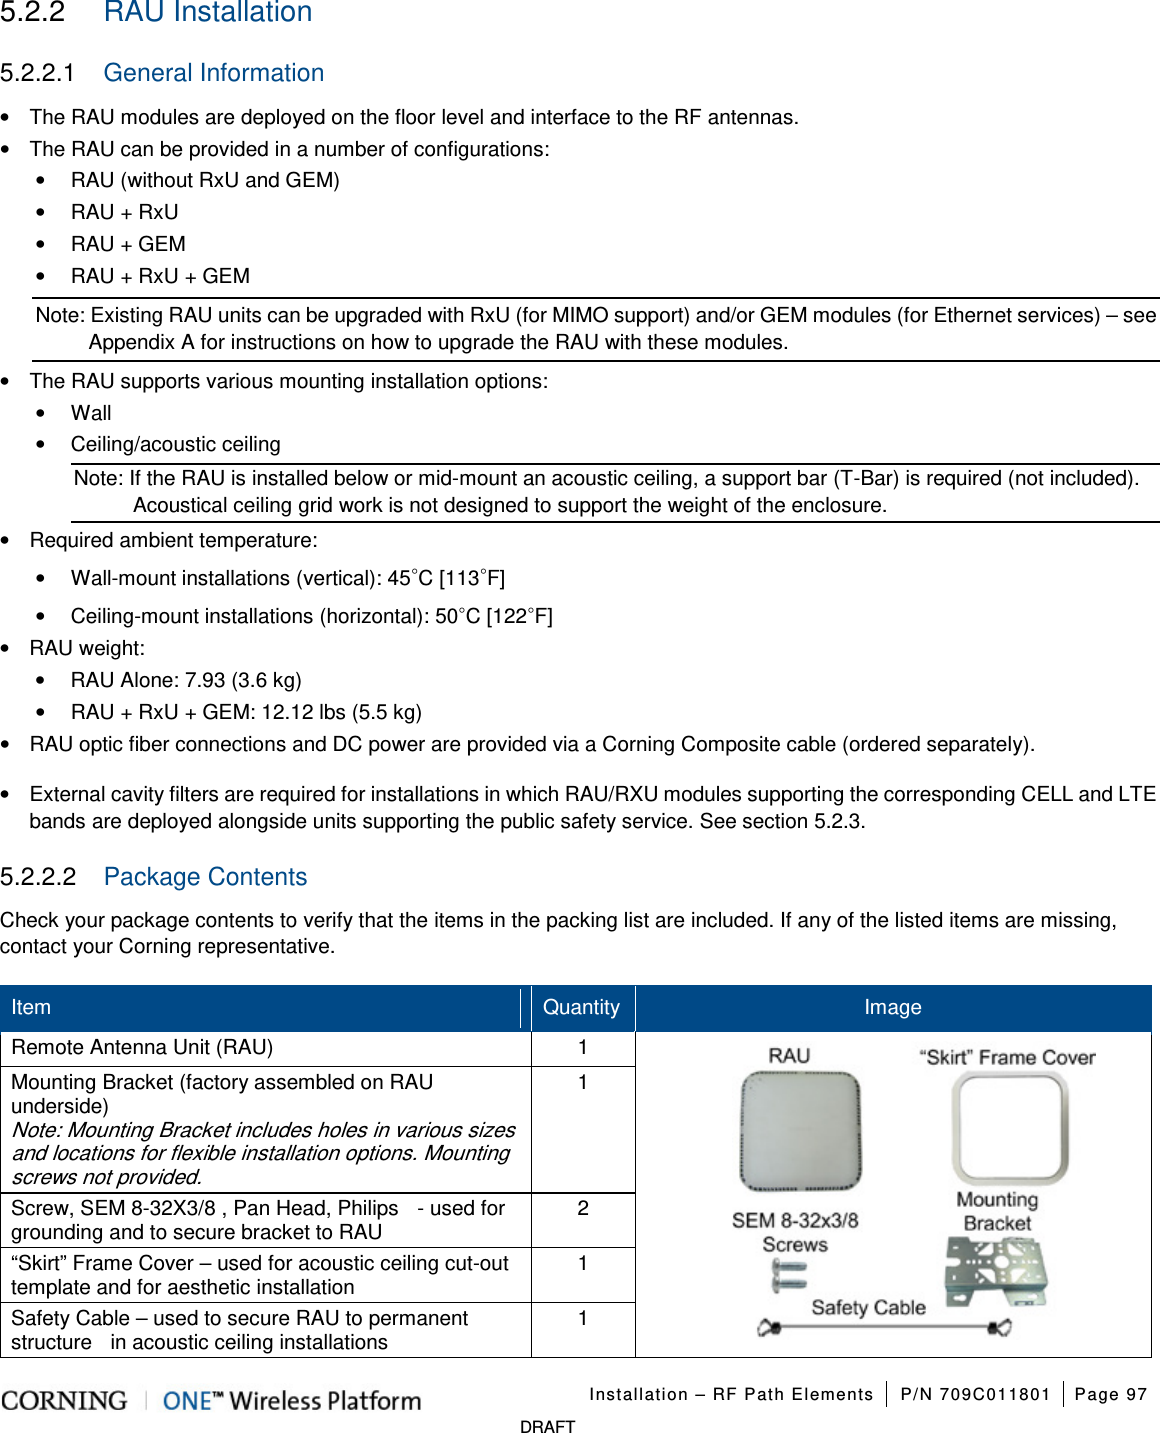   Installation – RF Path Elements P/N 709C011801 Page 97   DRAFT 5.2.2  RAU Installation 5.2.2.1  General Information • The RAU modules are deployed on the floor level and interface to the RF antennas. • The RAU can be provided in a number of configurations: • RAU (without RxU and GEM) • RAU + RxU • RAU + GEM • RAU + RxU + GEM Note: Existing RAU units can be upgraded with RxU (for MIMO support) and/or GEM modules (for Ethernet services) – see Appendix A for instructions on how to upgrade the RAU with these modules. • The RAU supports various mounting installation options: •  Wall •  Ceiling/acoustic ceiling Note: If the RAU is installed below or mid-mount an acoustic ceiling, a support bar (T-Bar) is required (not included). Acoustical ceiling grid work is not designed to support the weight of the enclosure. • Required ambient temperature: • Wall-mount installations (vertical): 45◦C [113◦F] • Ceiling-mount installations (horizontal): 50◦C [122◦F] • RAU weight: • RAU Alone: 7.93 (3.6 kg) • RAU + RxU + GEM: 12.12 lbs (5.5 kg) • RAU optic fiber connections and DC power are provided via a Corning Composite cable (ordered separately). •  External cavity filters are required for installations in which RAU/RXU modules supporting the corresponding CELL and LTE bands are deployed alongside units supporting the public safety service. See section  5.2.3. 5.2.2.2  Package Contents Check your package contents to verify that the items in the packing list are included. If any of the listed items are missing, contact your Corning representative. Item Quantity Image Remote Antenna Unit (RAU) 1            Mounting Bracket (factory assembled on RAU underside) Note: Mounting Bracket includes holes in various sizes and locations for flexible installation options. Mounting screws not provided. 1 Screw, SEM 8-32X3/8 , Pan Head, Philips    - used for grounding and to secure bracket to RAU 2 “Skirt” Frame Cover – used for acoustic ceiling cut-out template and for aesthetic installation   1 Safety Cable – used to secure RAU to permanent structure    in acoustic ceiling installations 1 